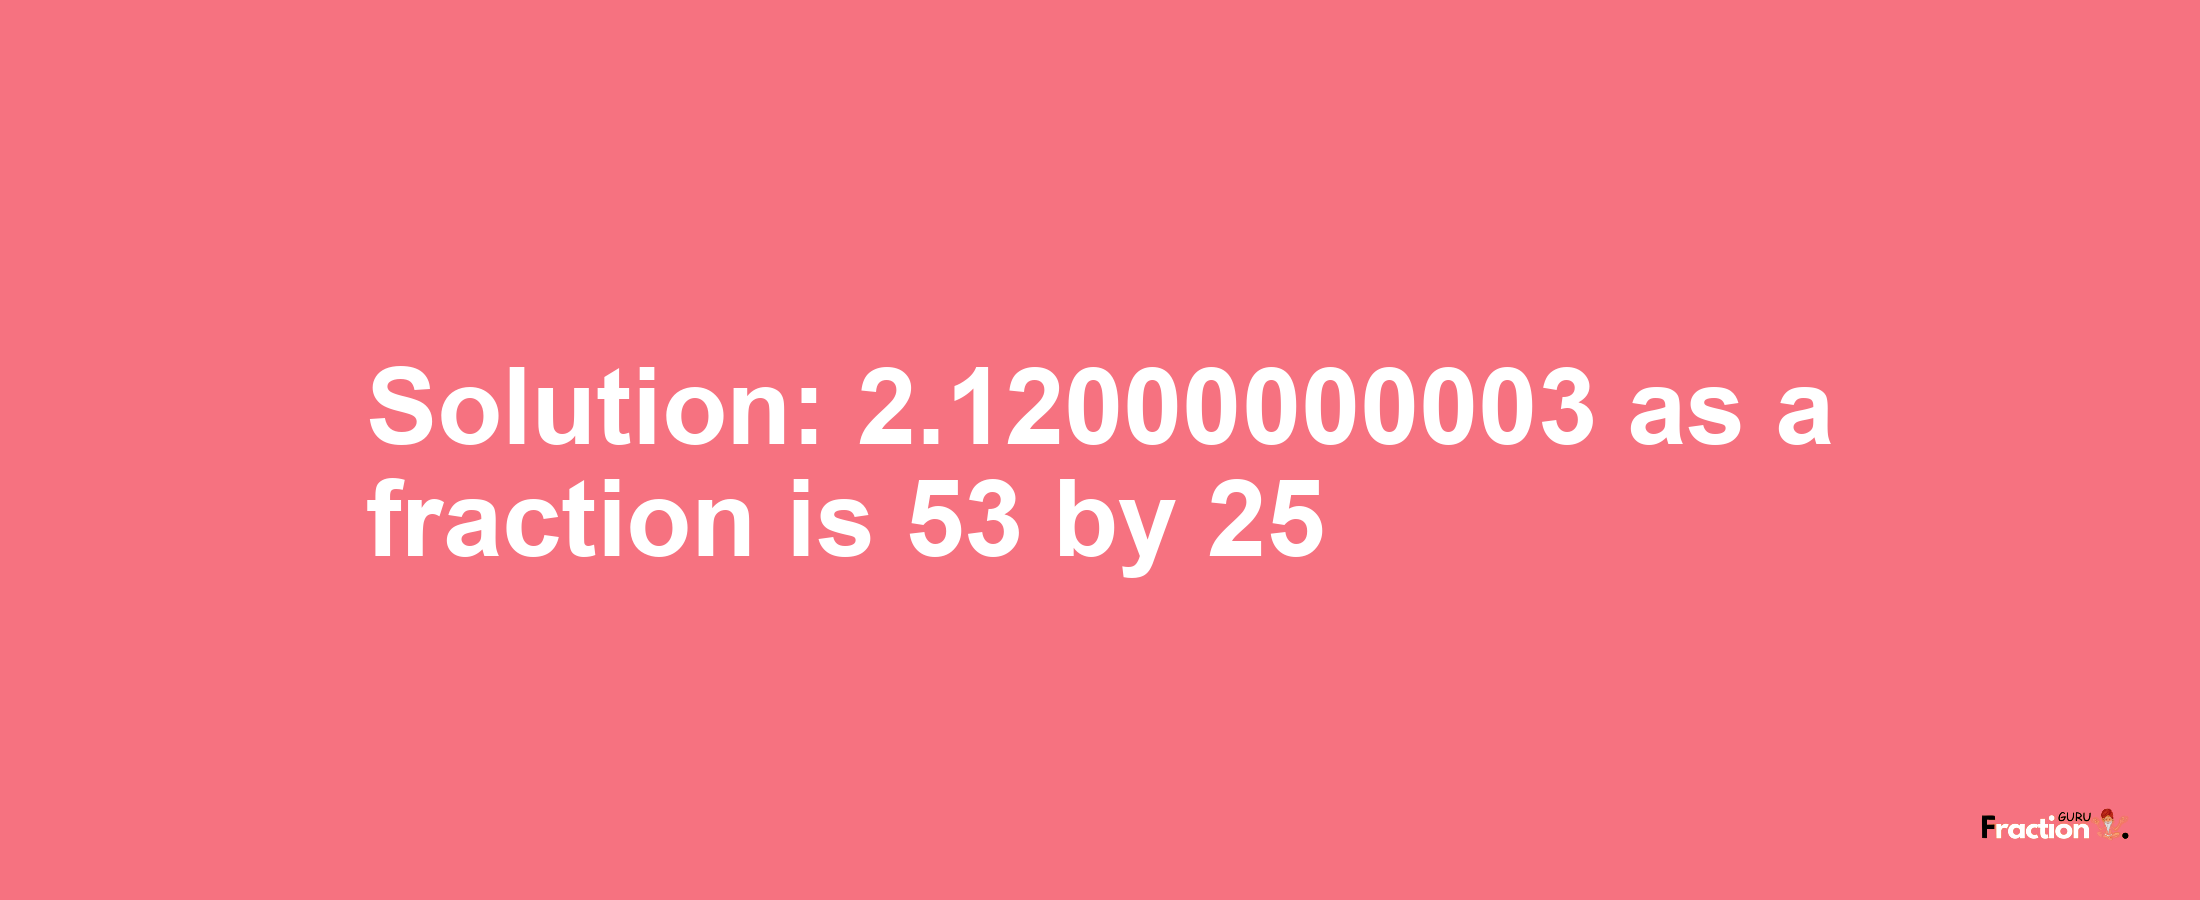 Solution:2.12000000003 as a fraction is 53/25